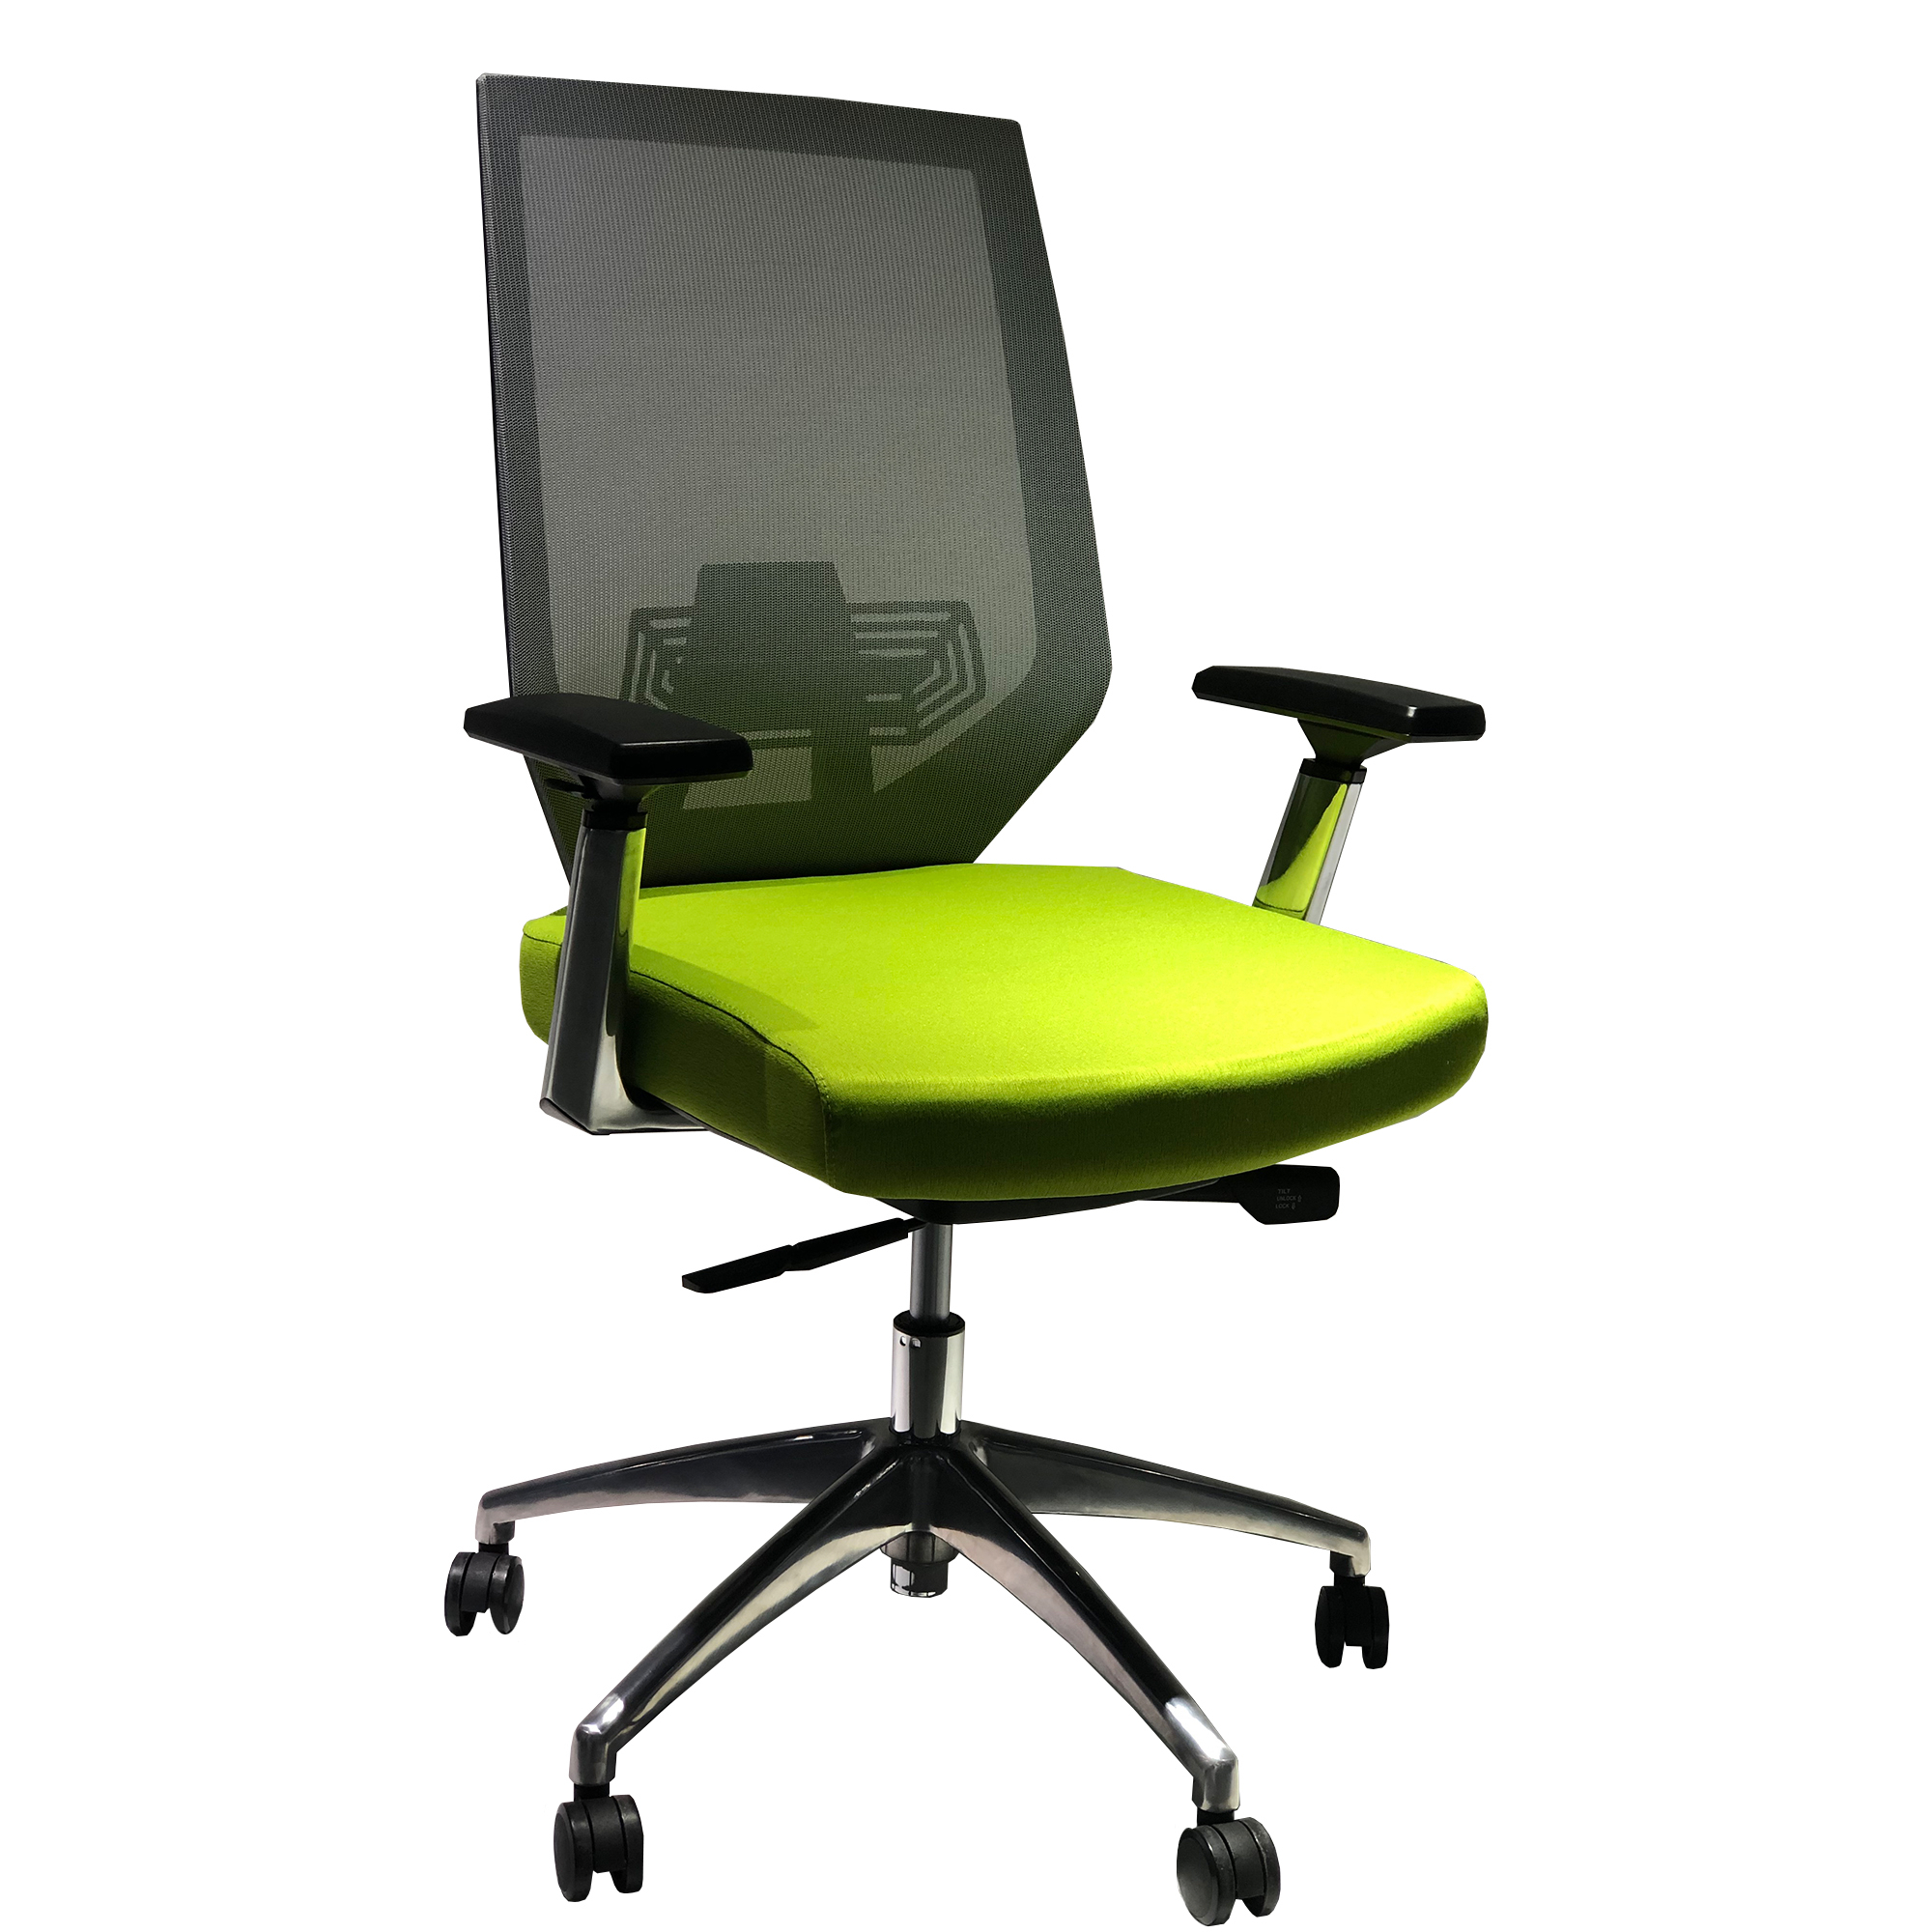 Adjustable Mesh Back Ergonomic Office Swivel Chair With Padded Seat And Casters, Green And Gray- Saltoro Sherpi